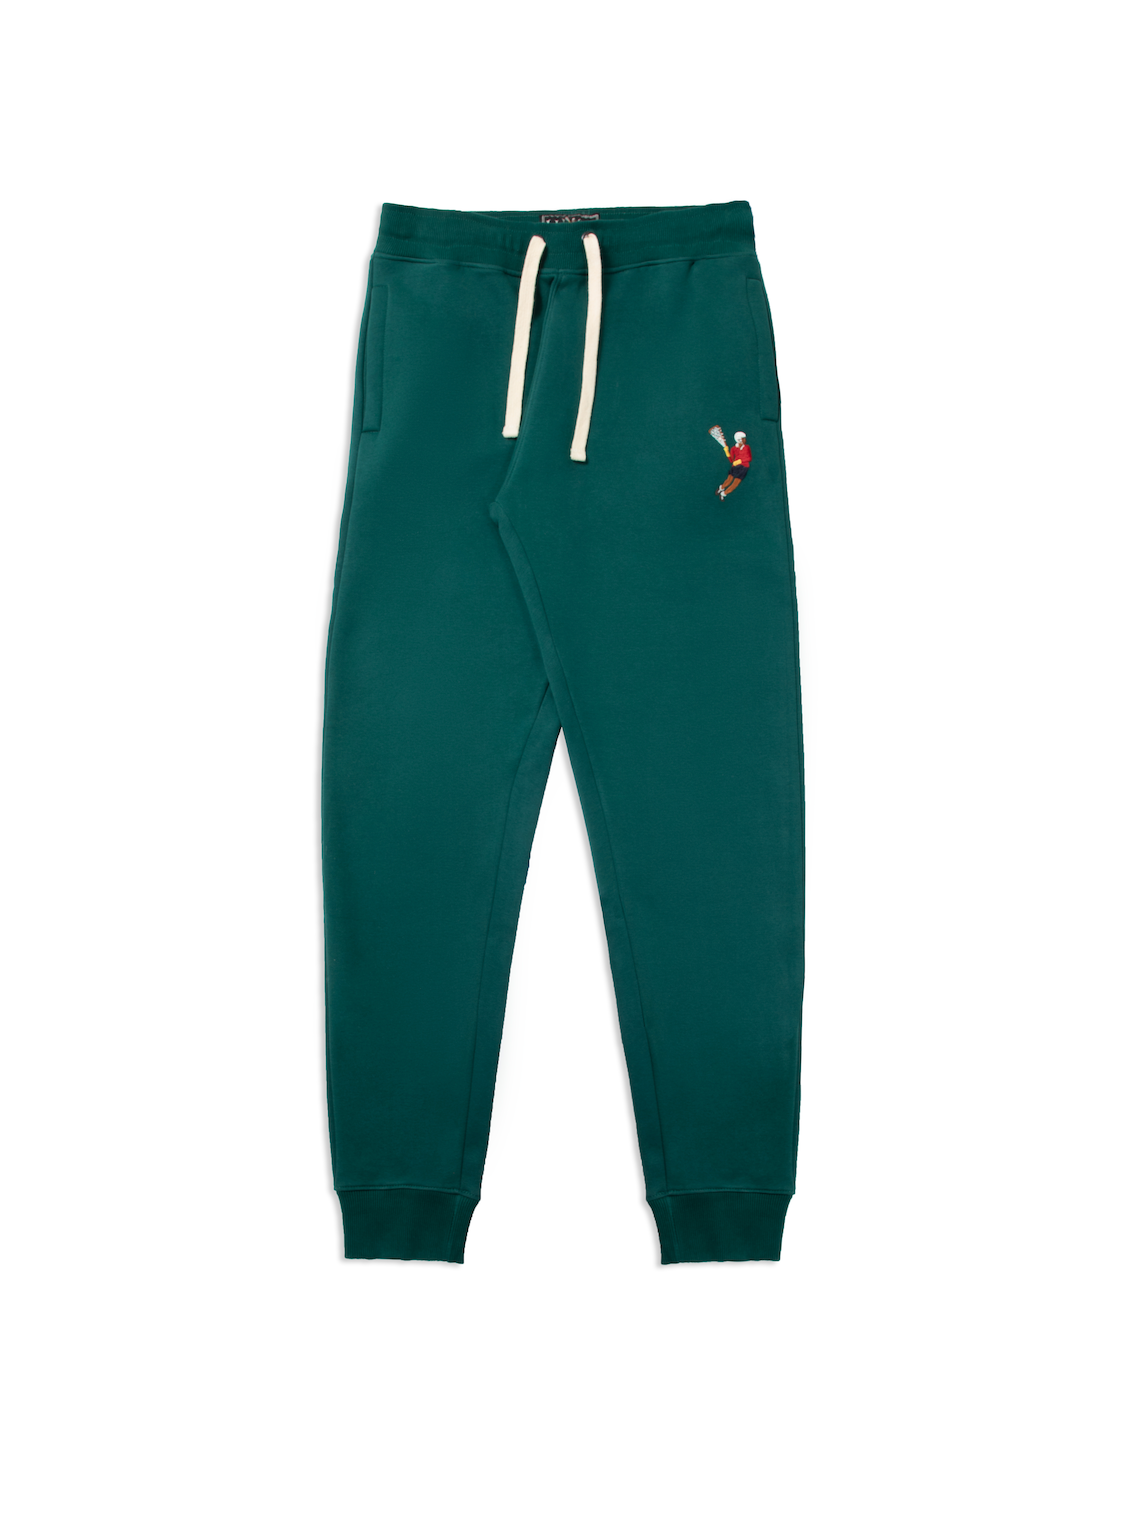 Lax World X Lusa 1904 Classic Green Fleece Lacrosse Jogger Pant - Front 